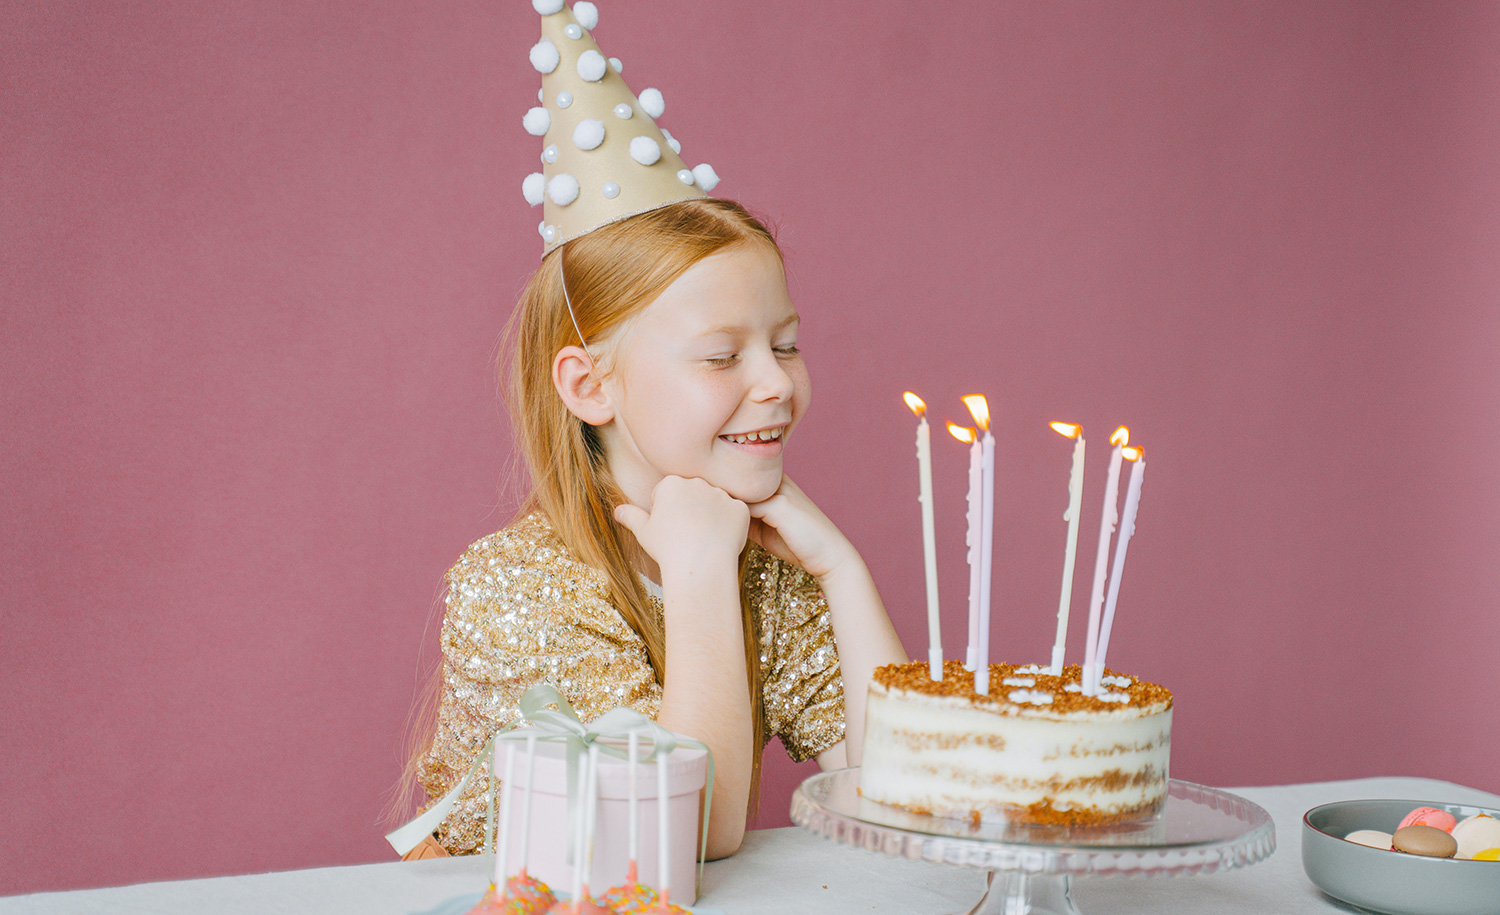 A highly sensitive child gets ready to blow out the candles on her birthday cake